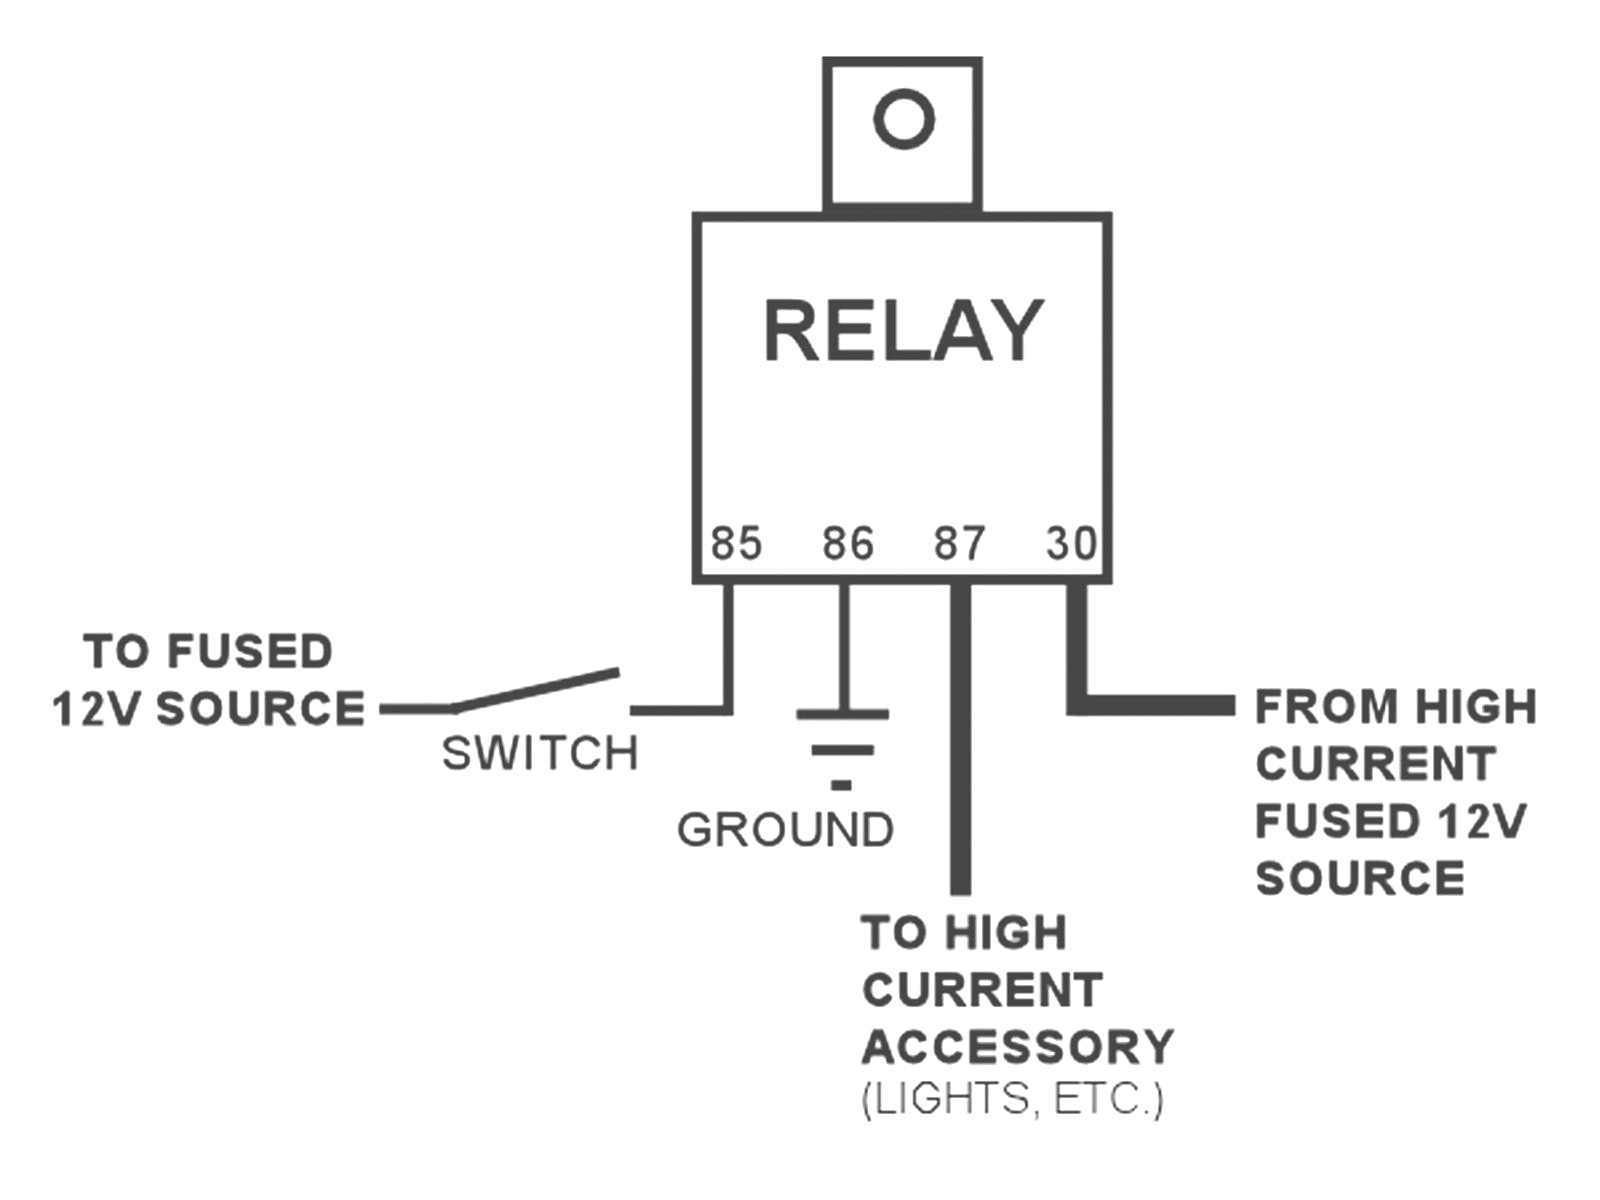 relay wiring diagram also 4 pin relay diagram on 12 volt relay12 volt relay wiring diagram 4 pole wiring diagrams relay wiring diagram also 4 pin relay